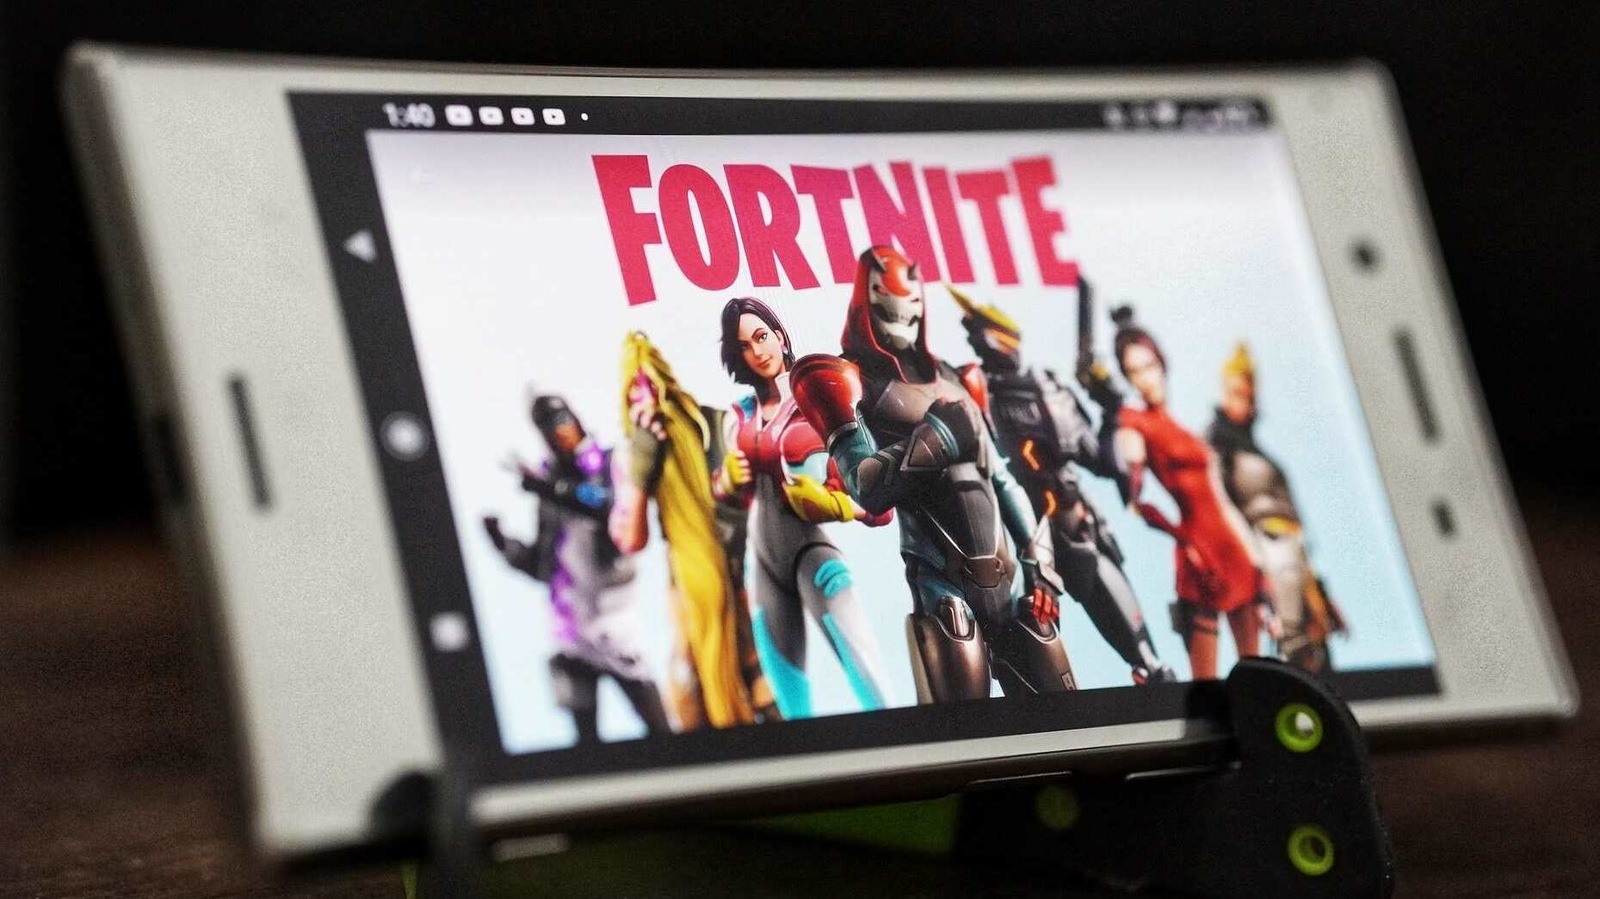 Samsung Galaxy phone users can download Fortnite to get 'Mega Drop Offers